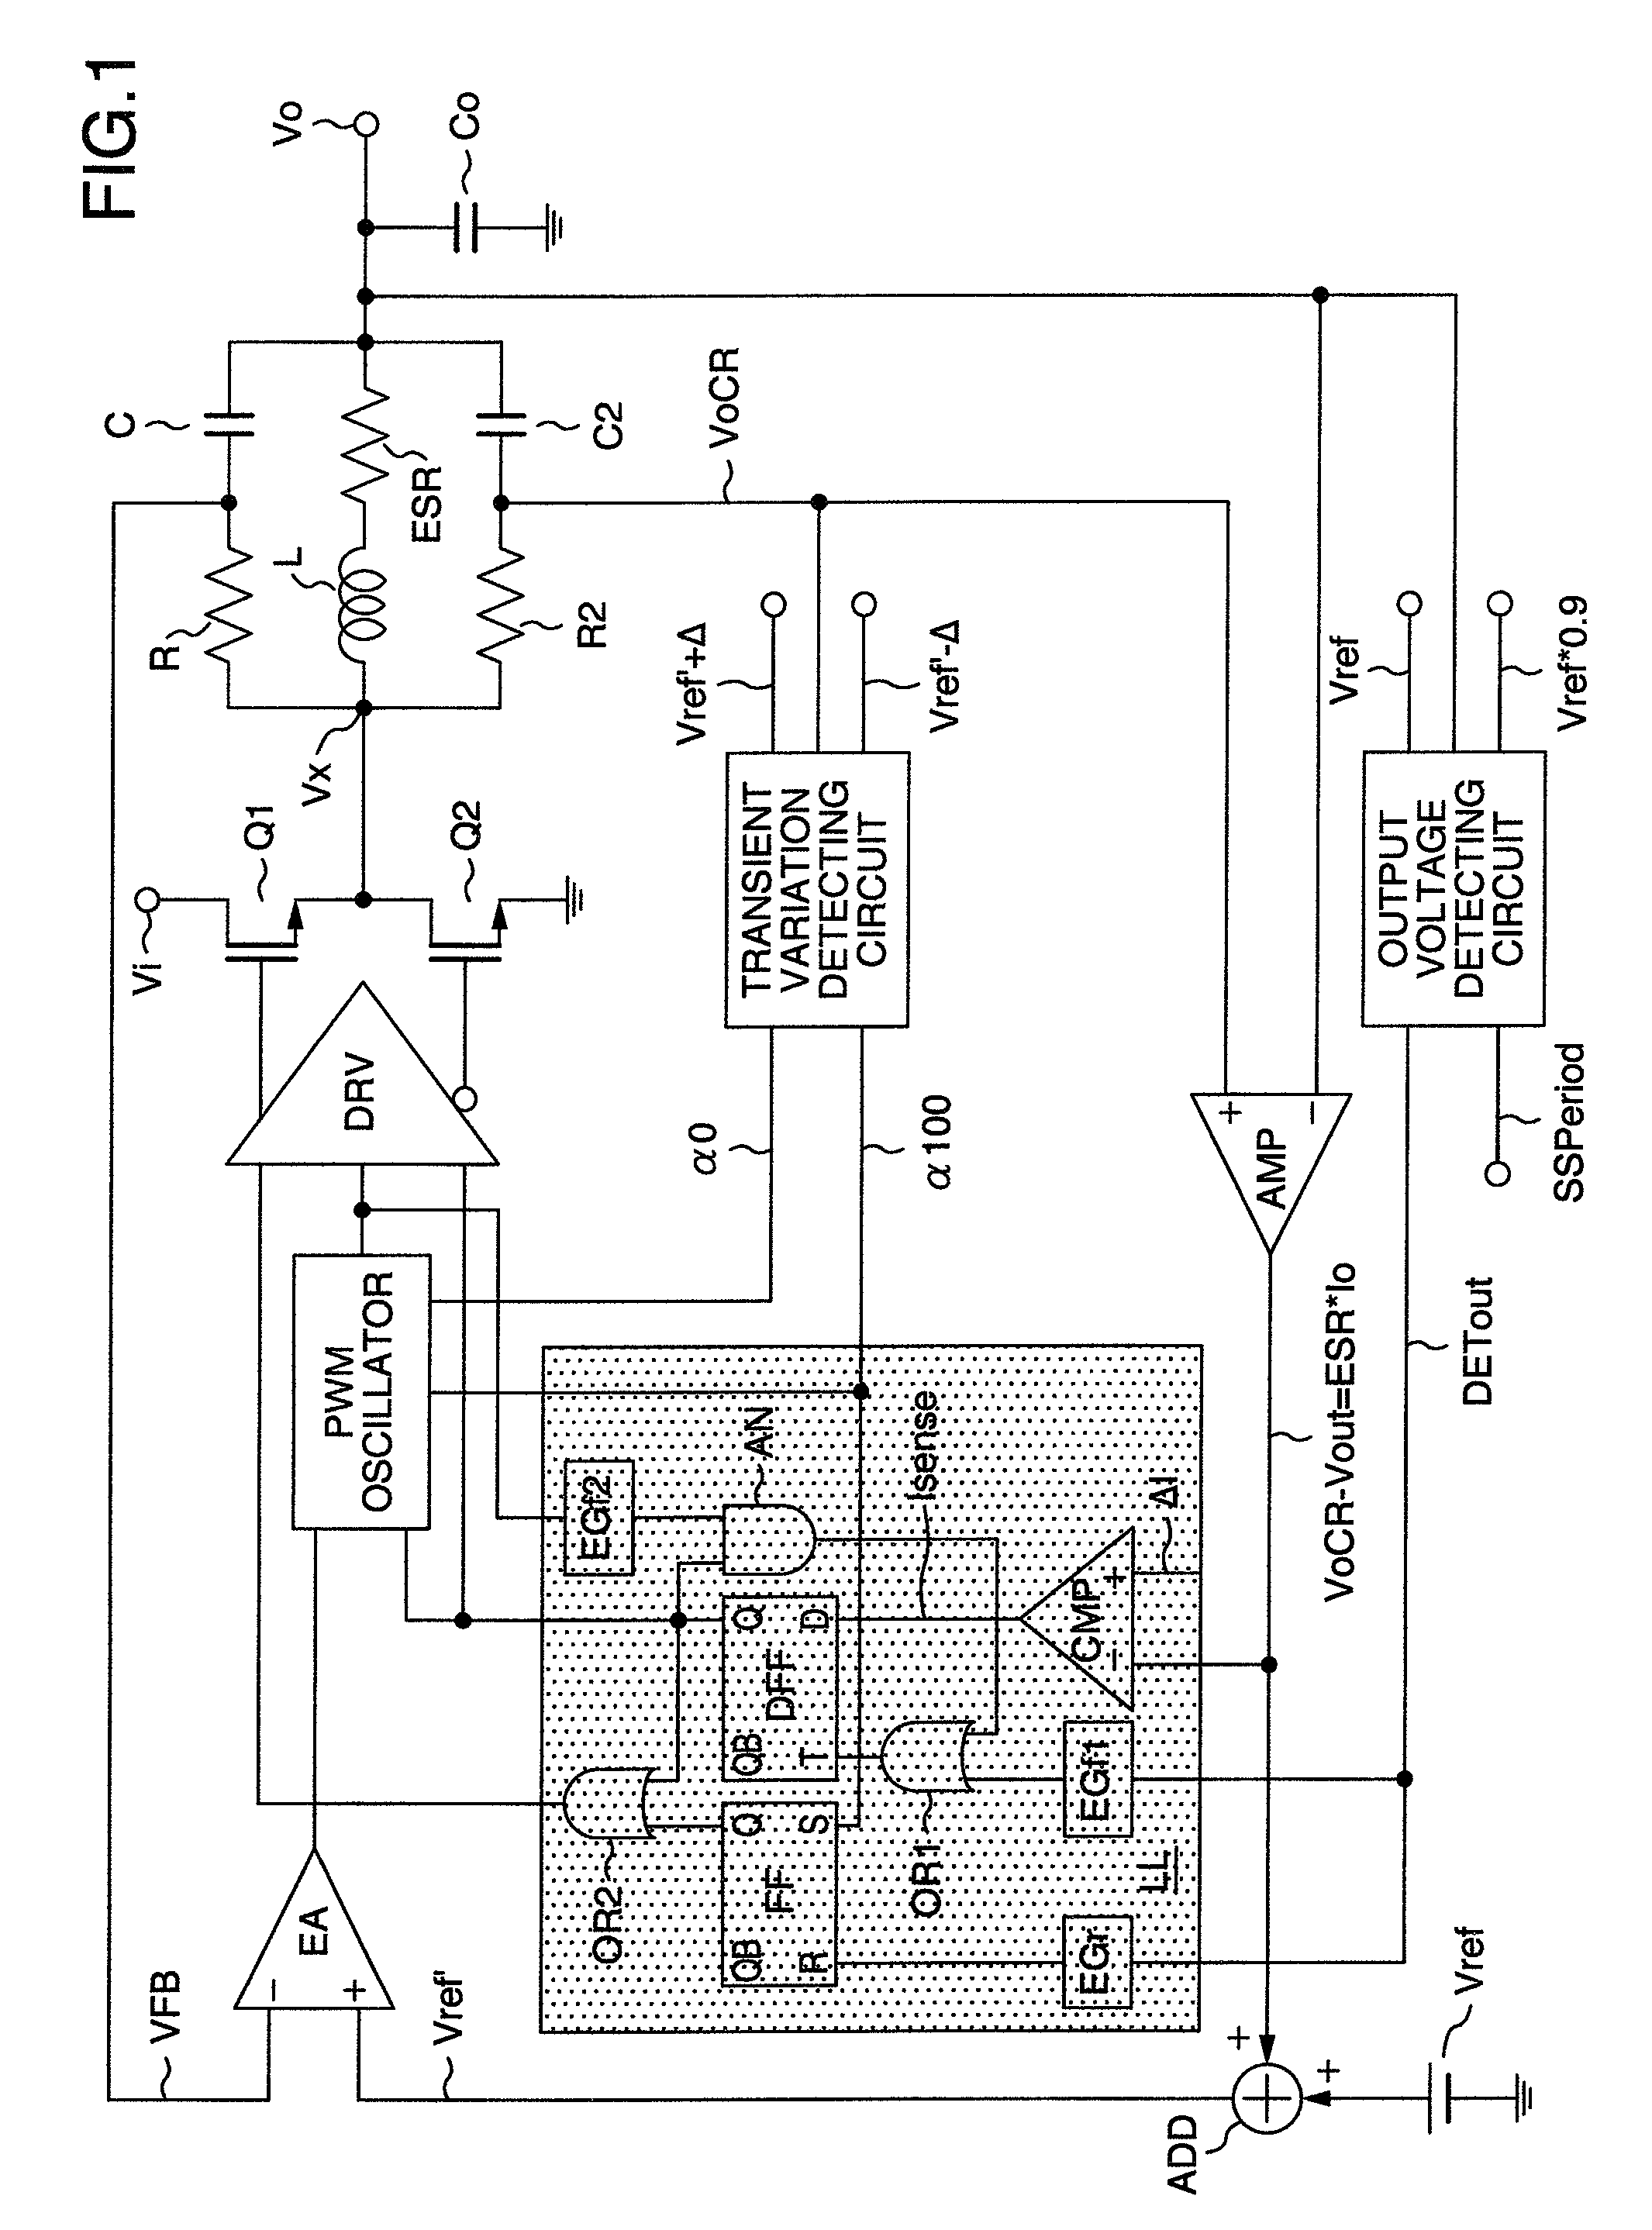 Power supplying apparatus including a pulse-width modulation oscillator and smoothing filters